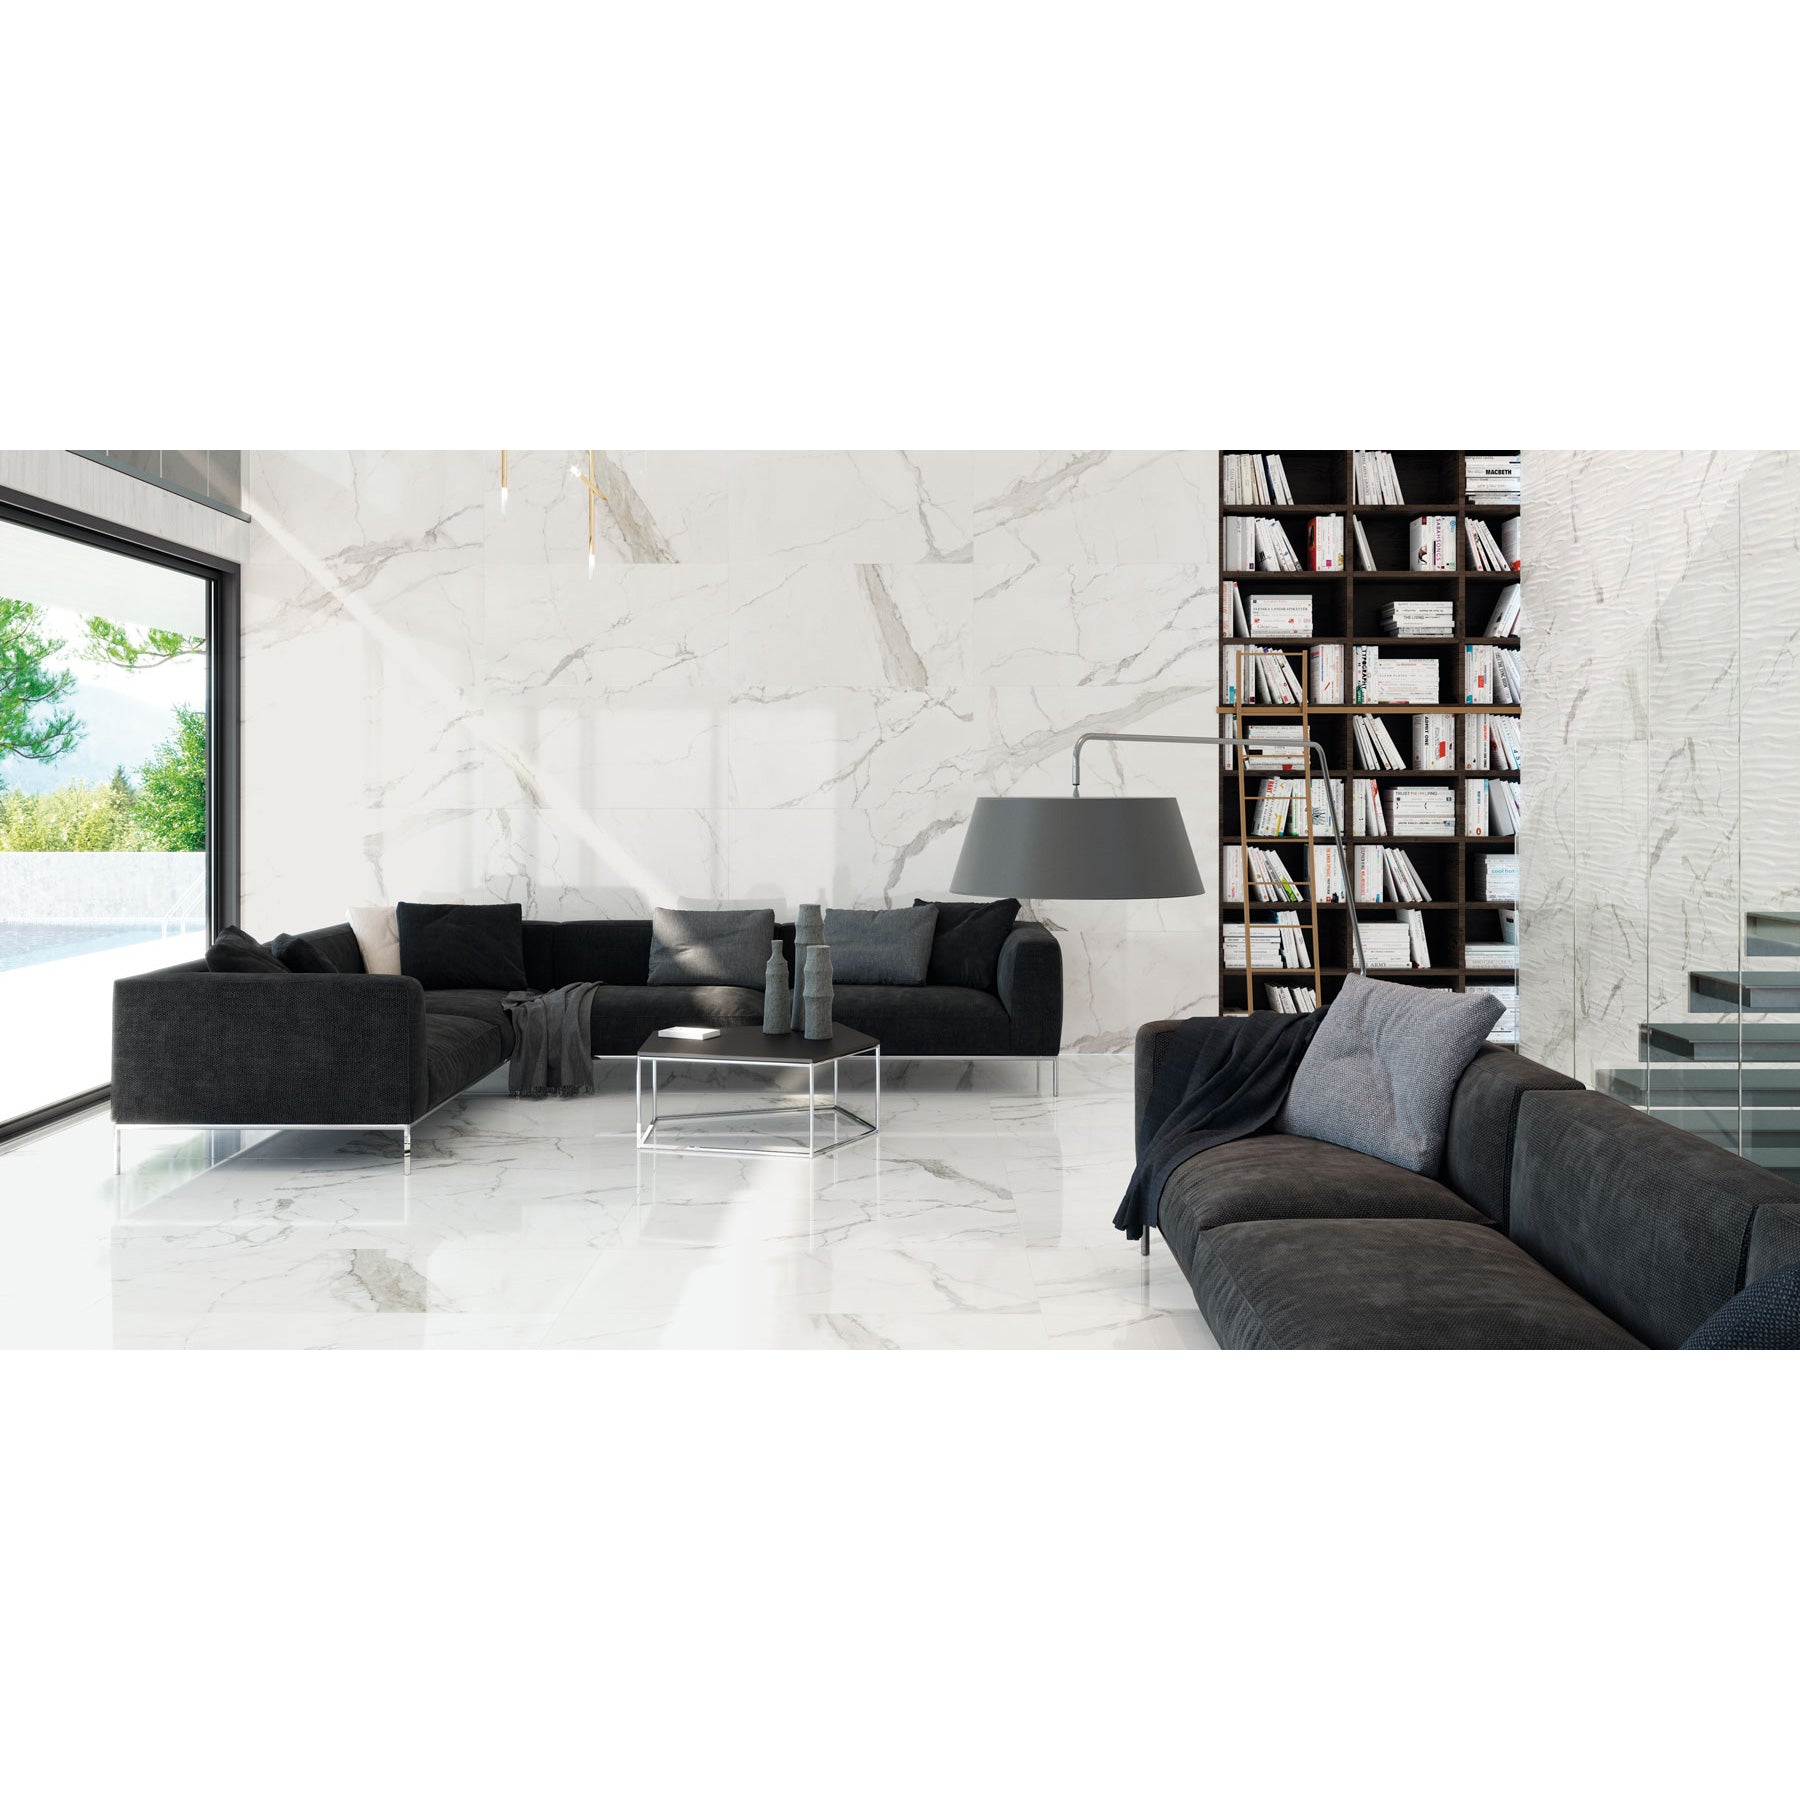 Happy Floors - Statuario 12 in. x 36 in. Rectified Porcelain Wave Wall Tile - (Glossy)